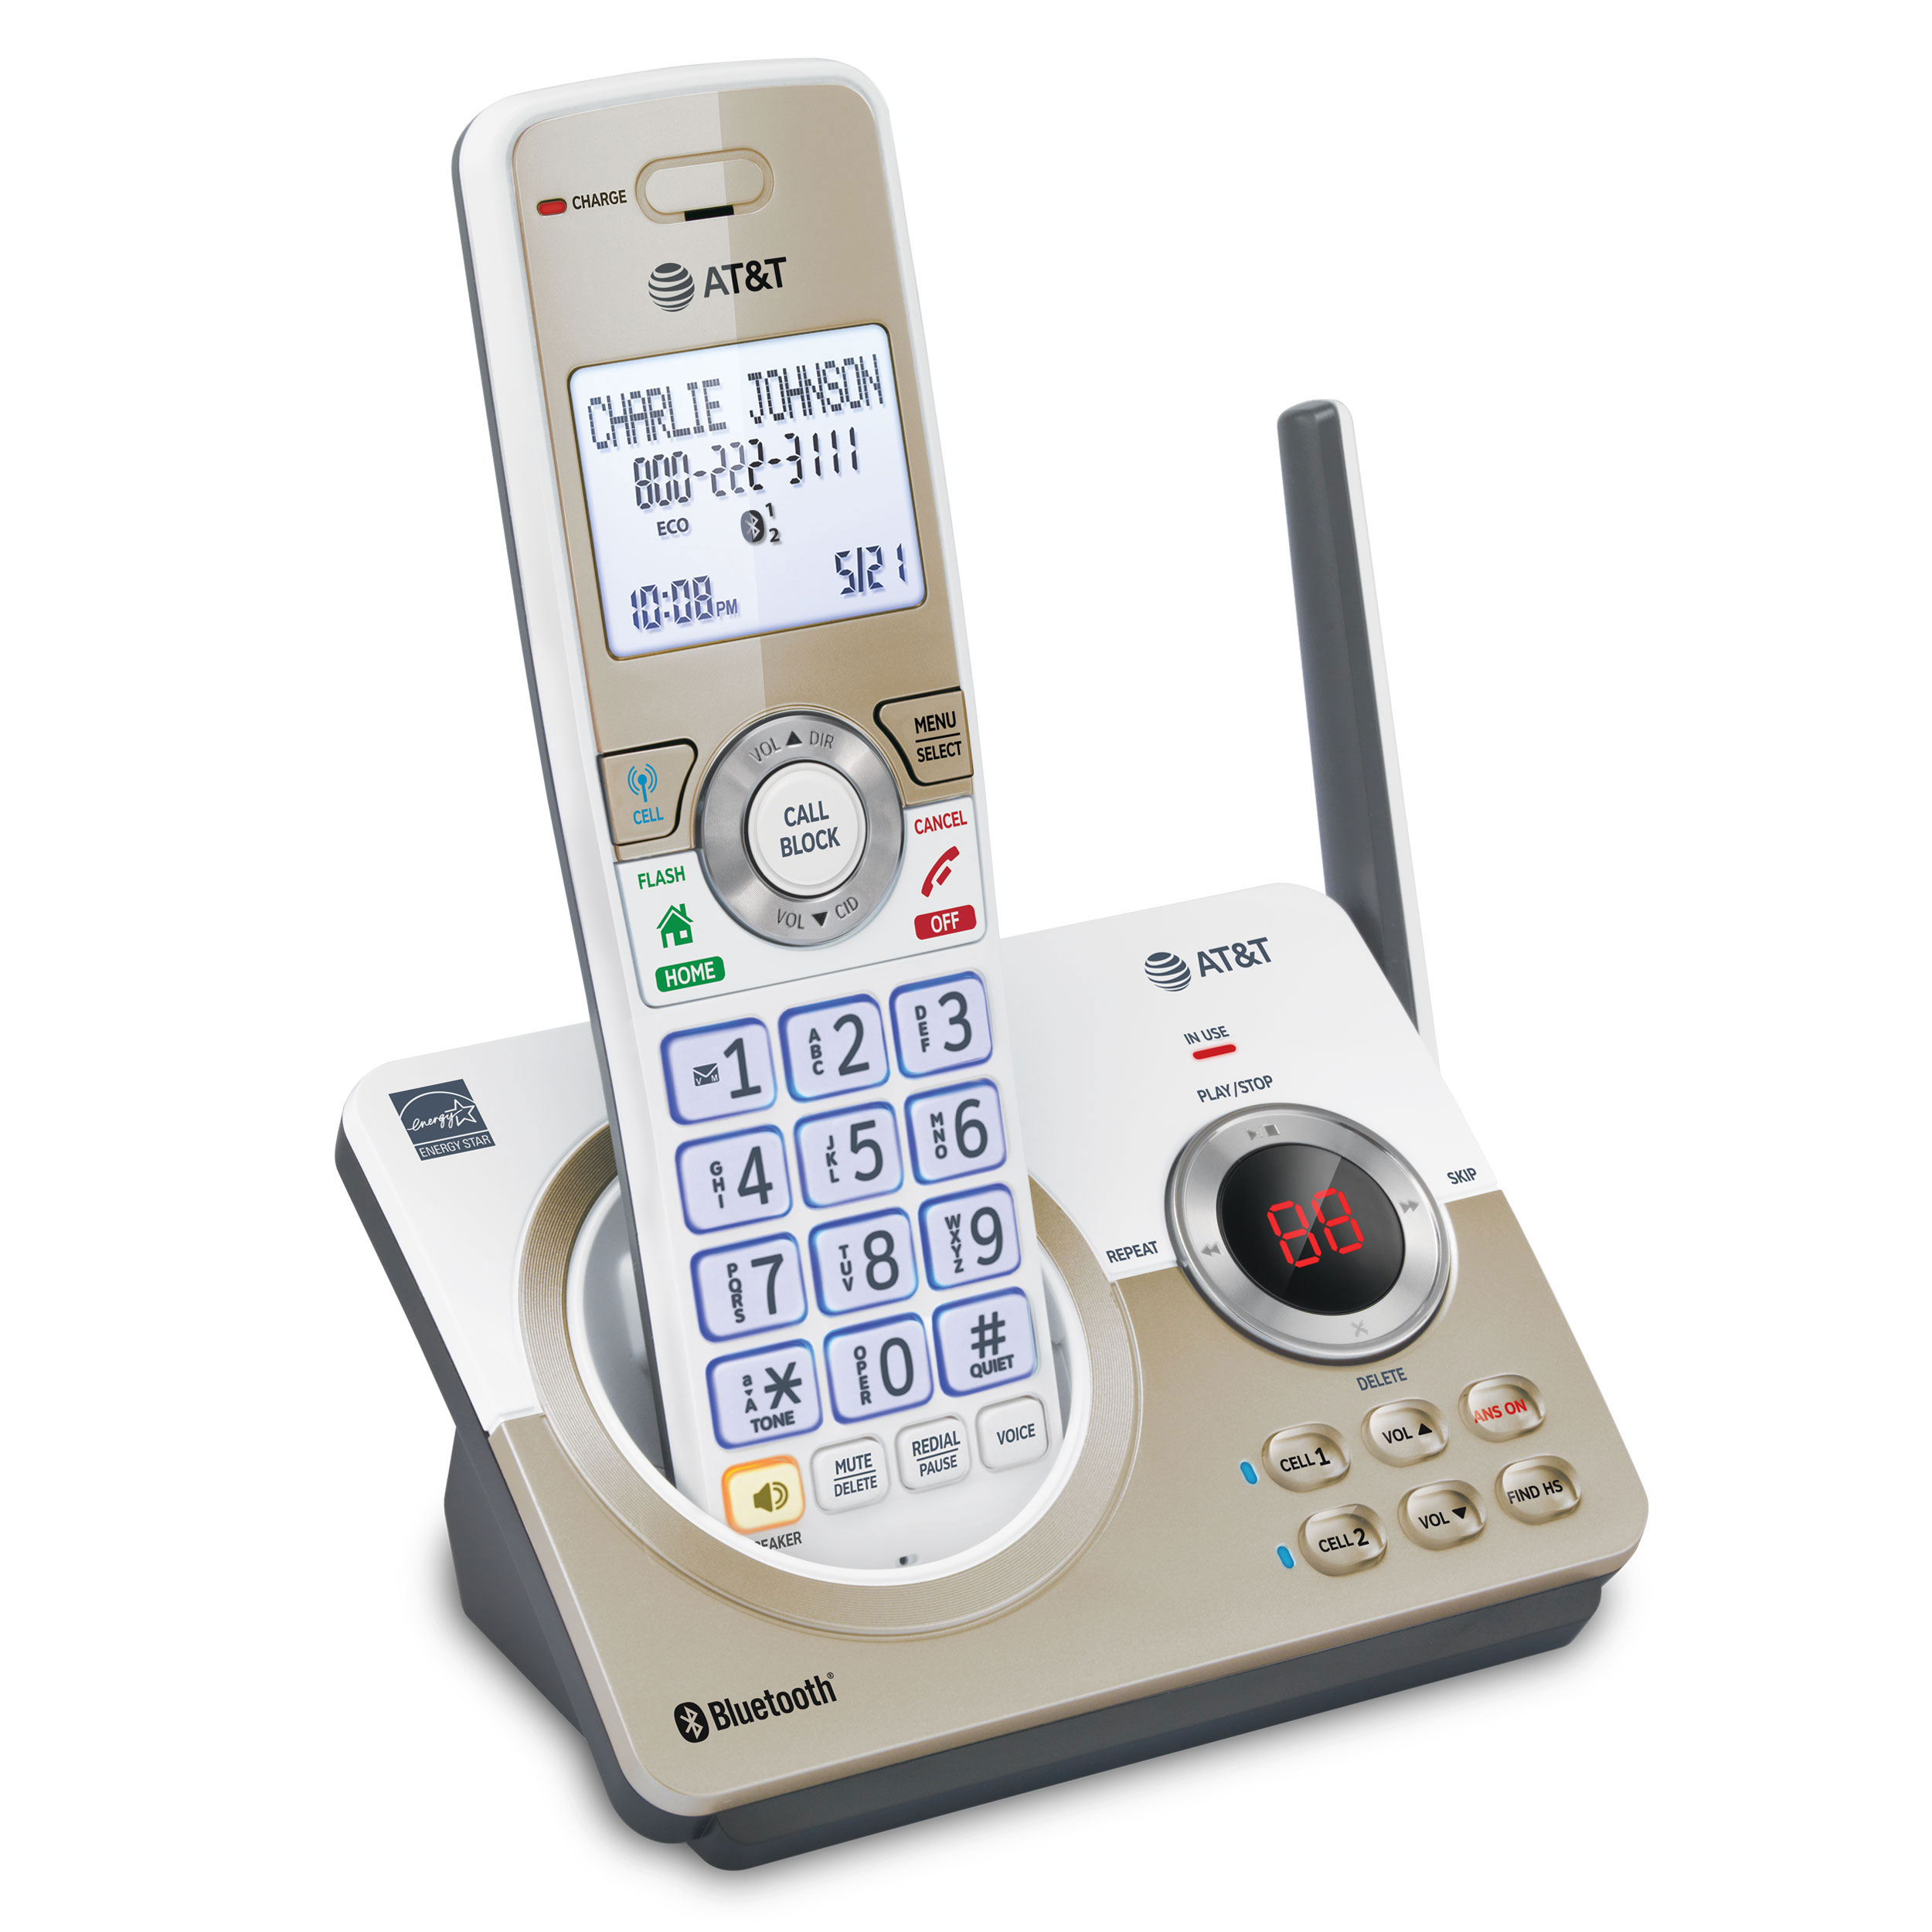 4-Handset Expandable Cordless Phone with Unsurpassed Range, Bluetooth Connect to Cell™, Smart Call Blocker and Answering System - view 2